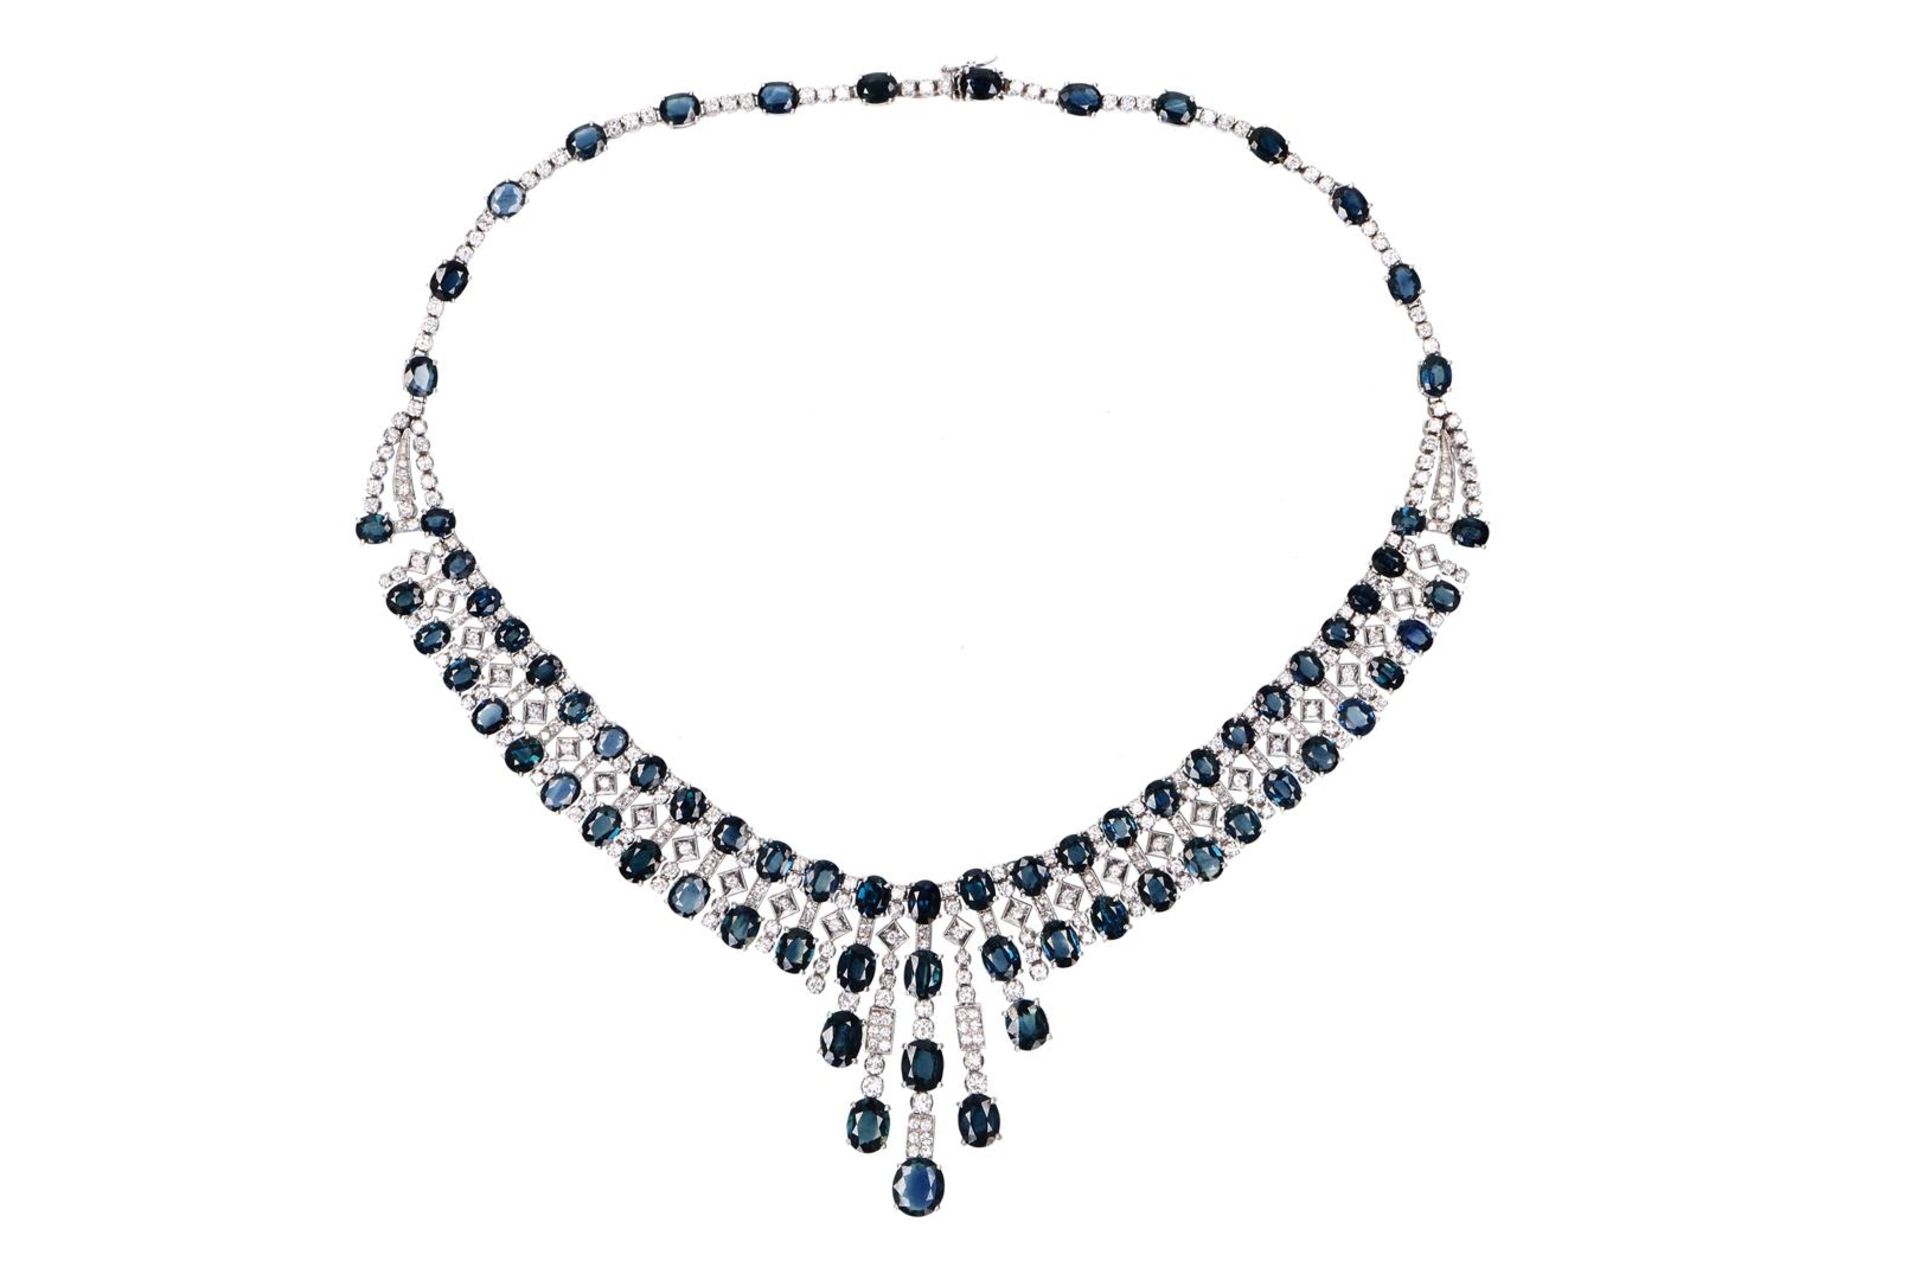 An 18-kt white golden necklace, set with 312 brilliant cut diamonds and 74 oval cut sapphires. 1960